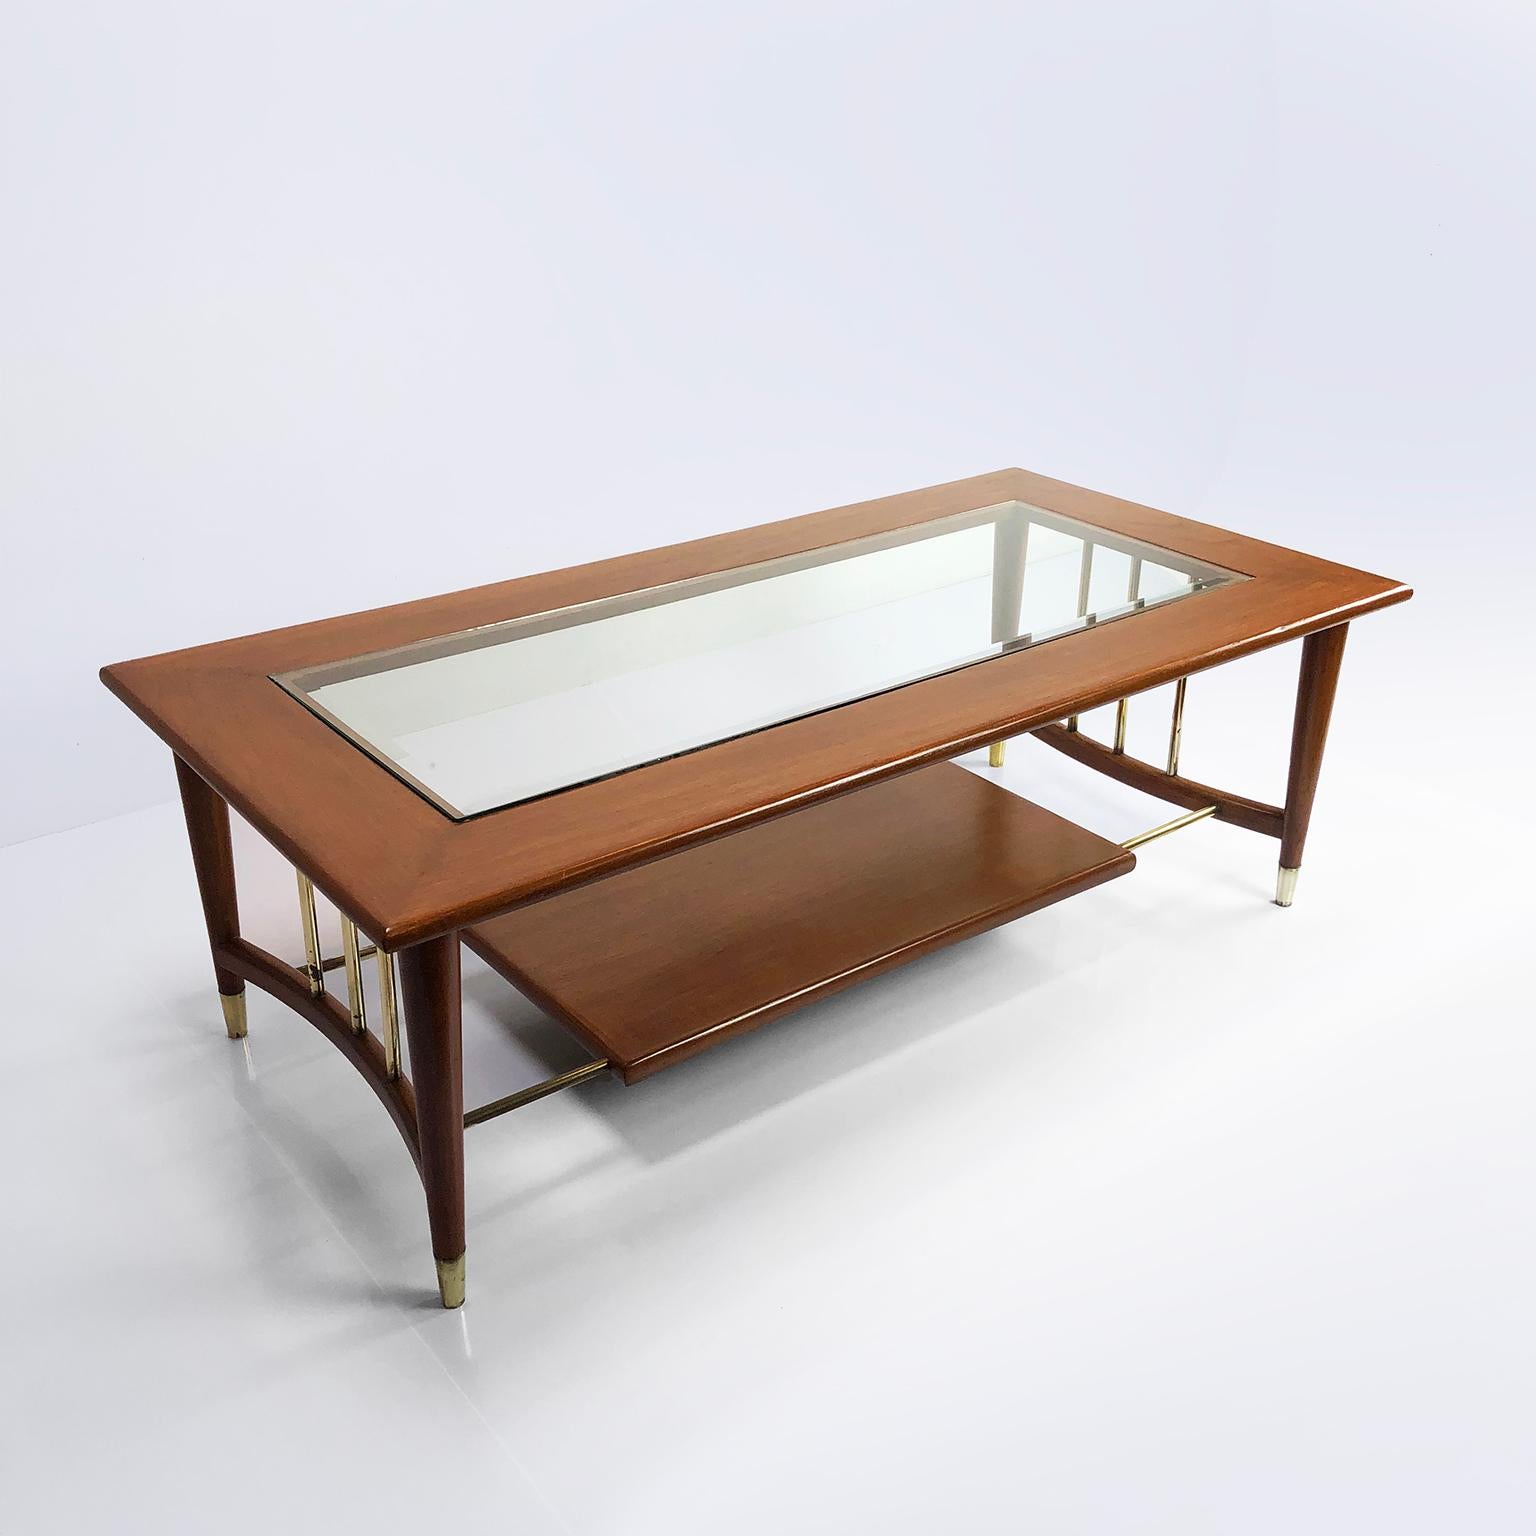 This amazing coffee table are made of mexican mahogany and brass,
circa 1960s.

About Frank Kyle

Frank Kyle was an American sculptor and furniture designer from Minneapolis, though he mainly lived in California. Kyle moved to Mexico City in